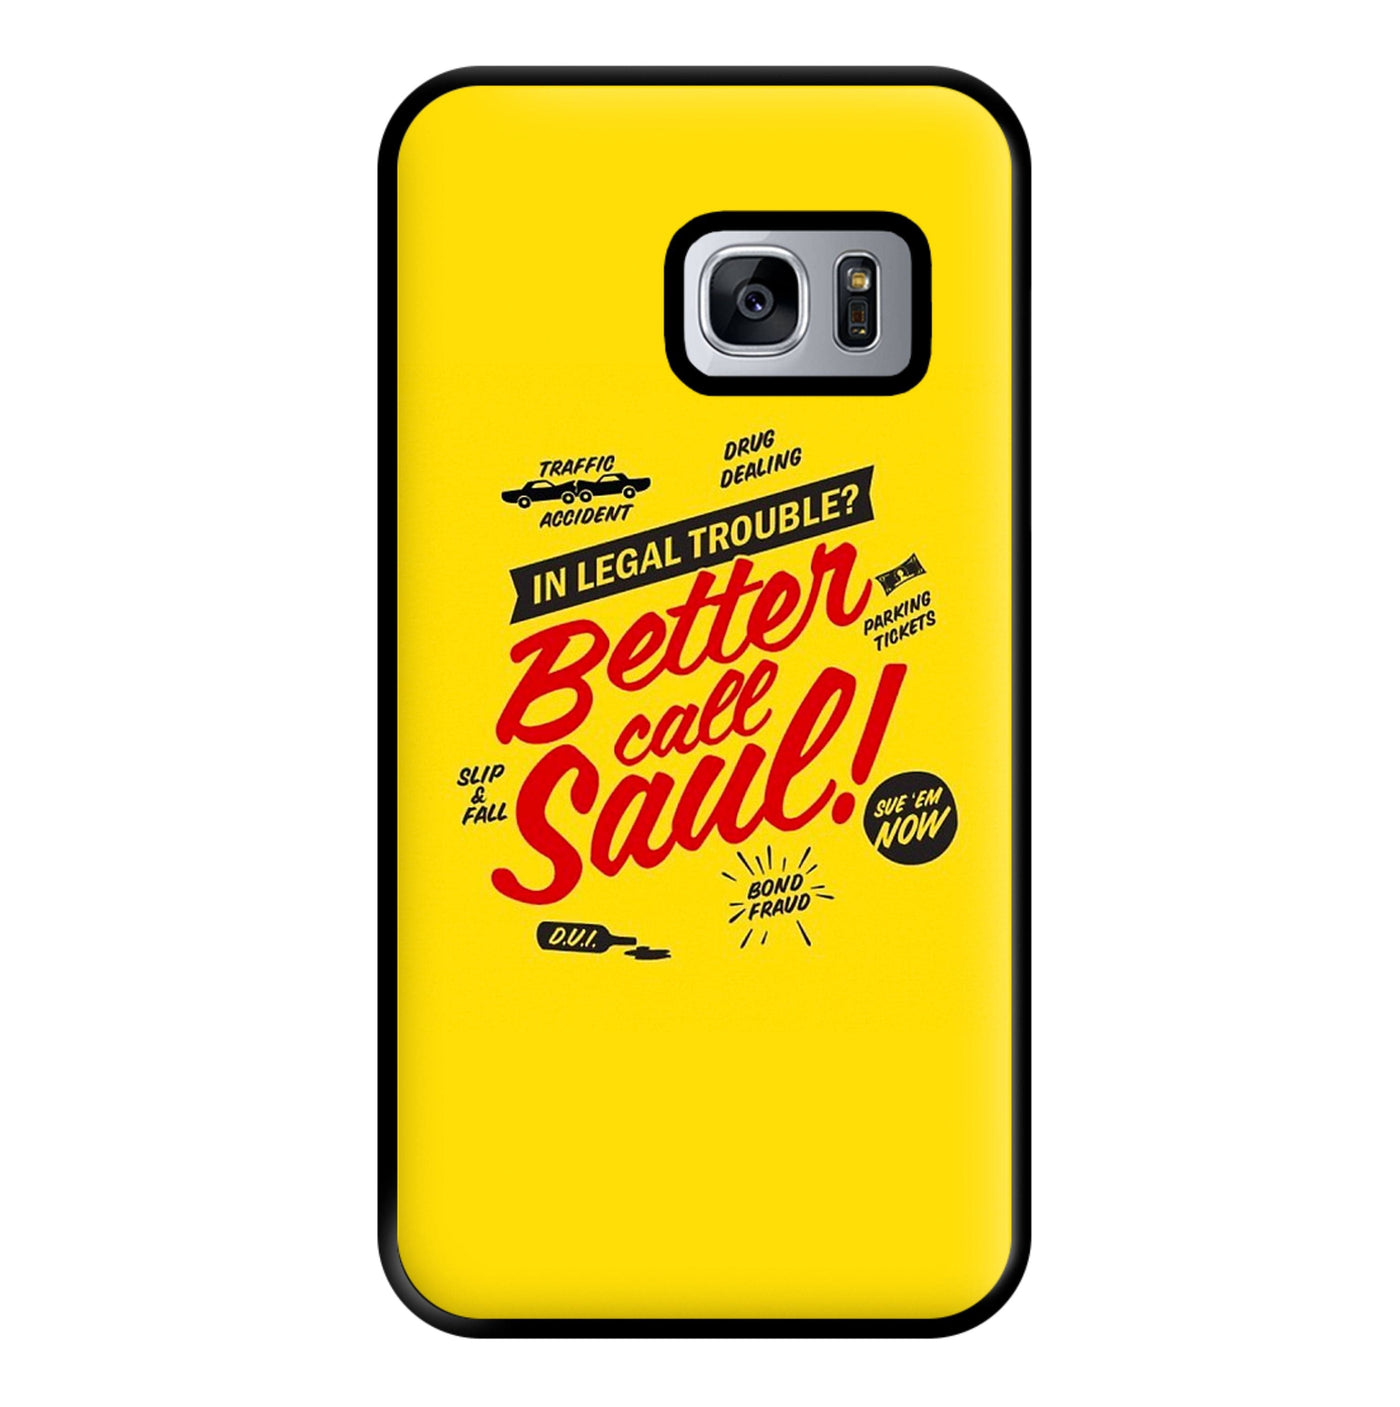 In Legal Trouble? Better Call Saul Phone Case